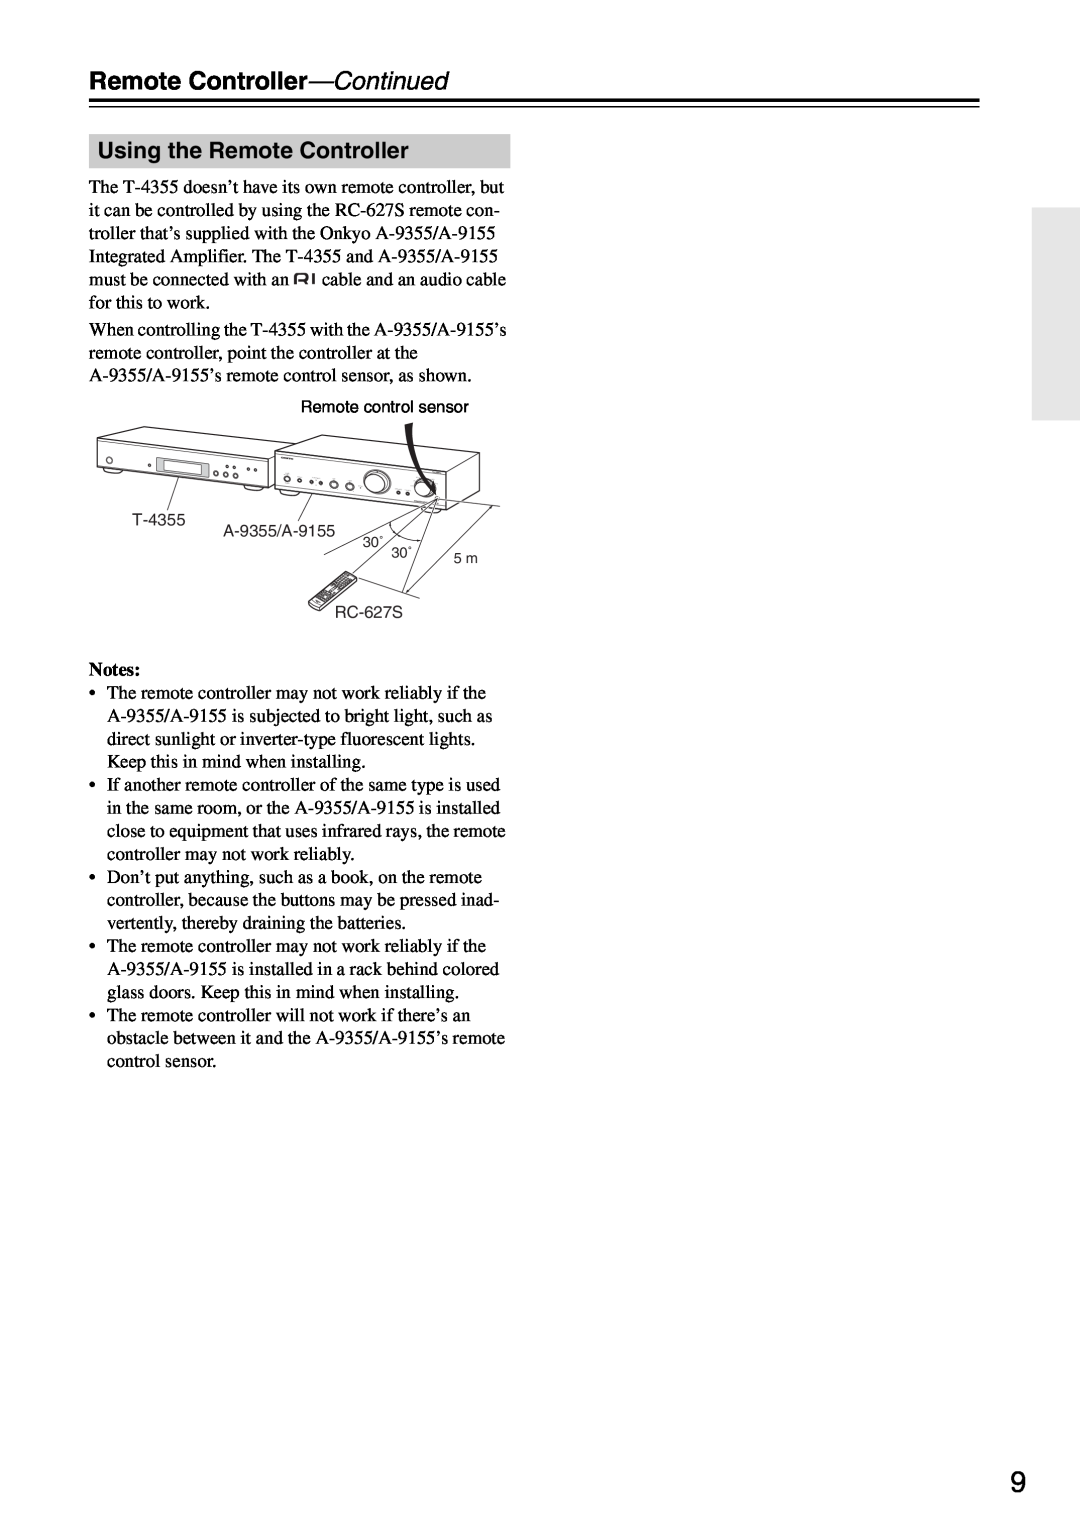 Onkyo T-4355 instruction manual Remote Controller-Continued, Using the Remote Controller 